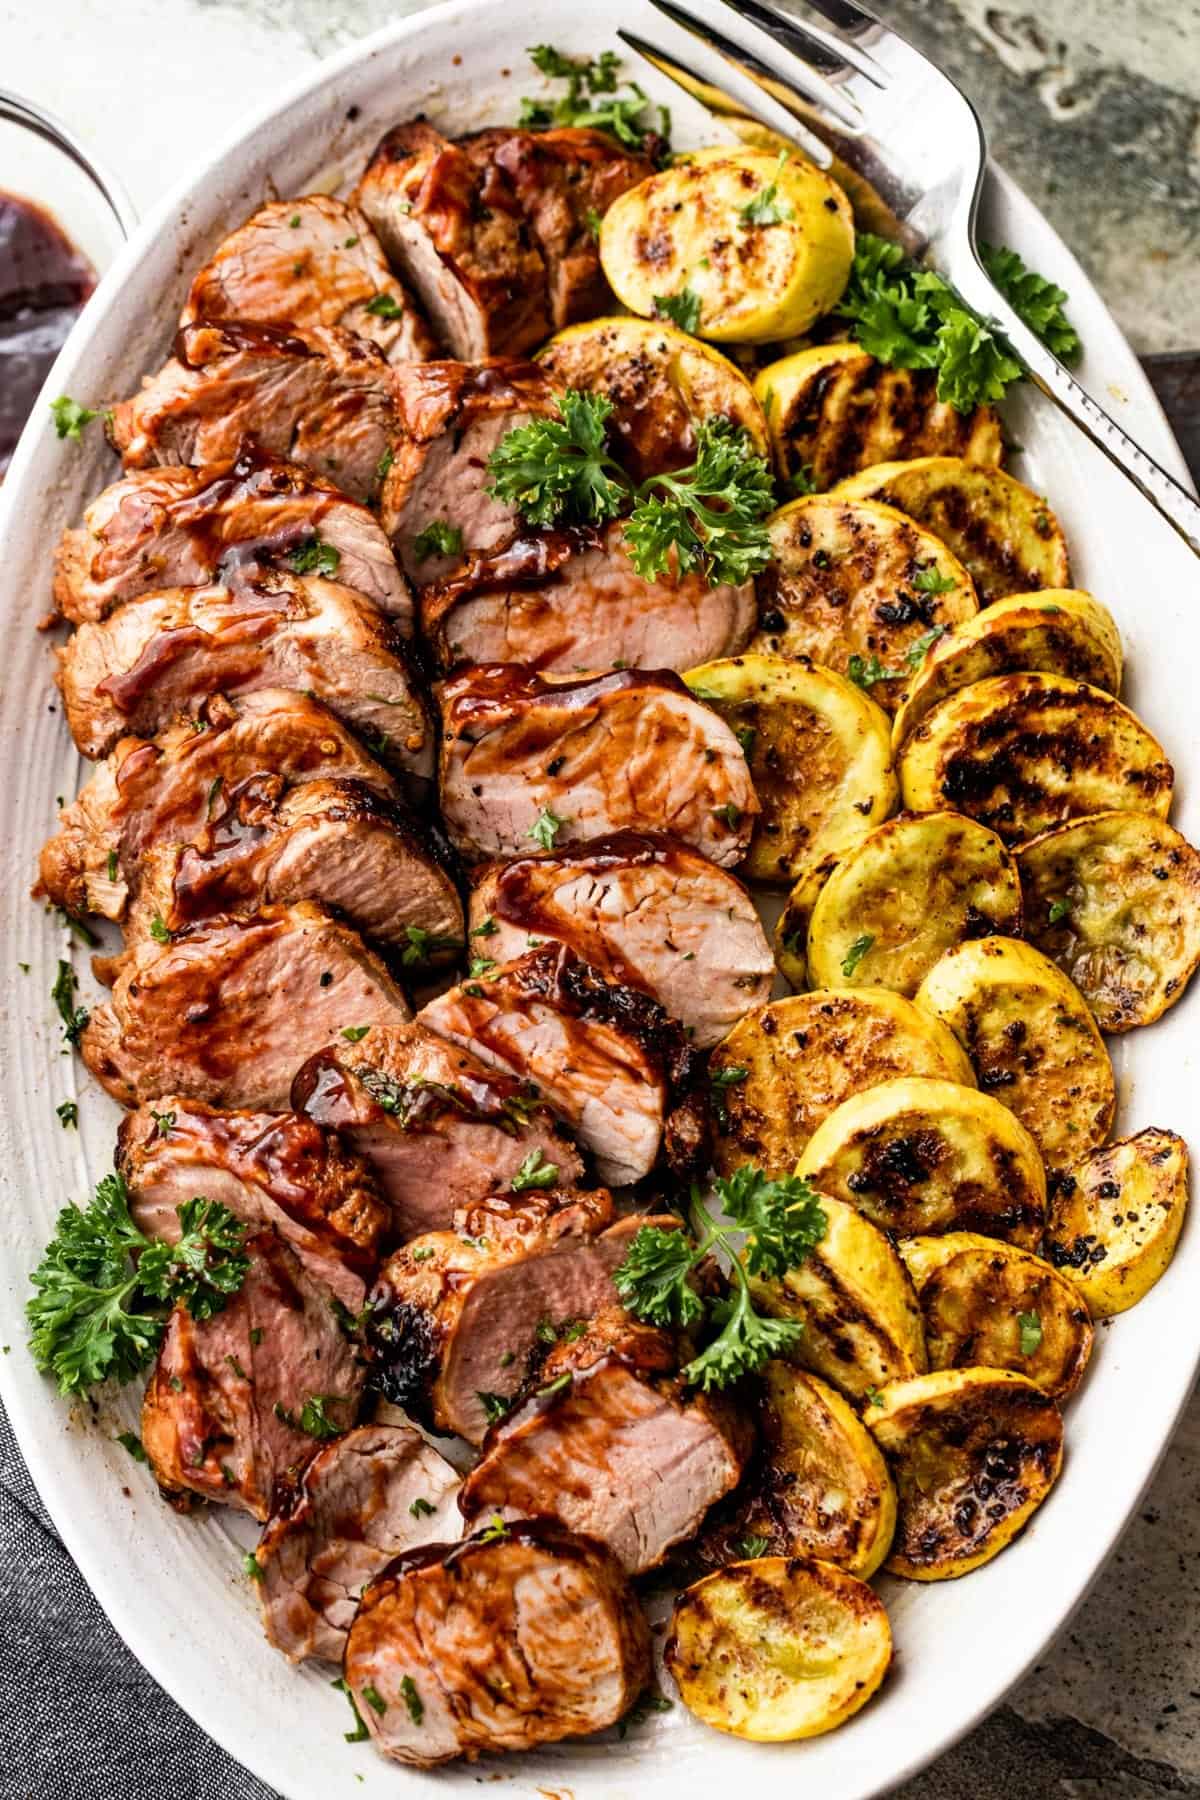 grilled pork tenderloin, sliced, and arranged on an oval platter alongside sliced and grilled yellow squash.